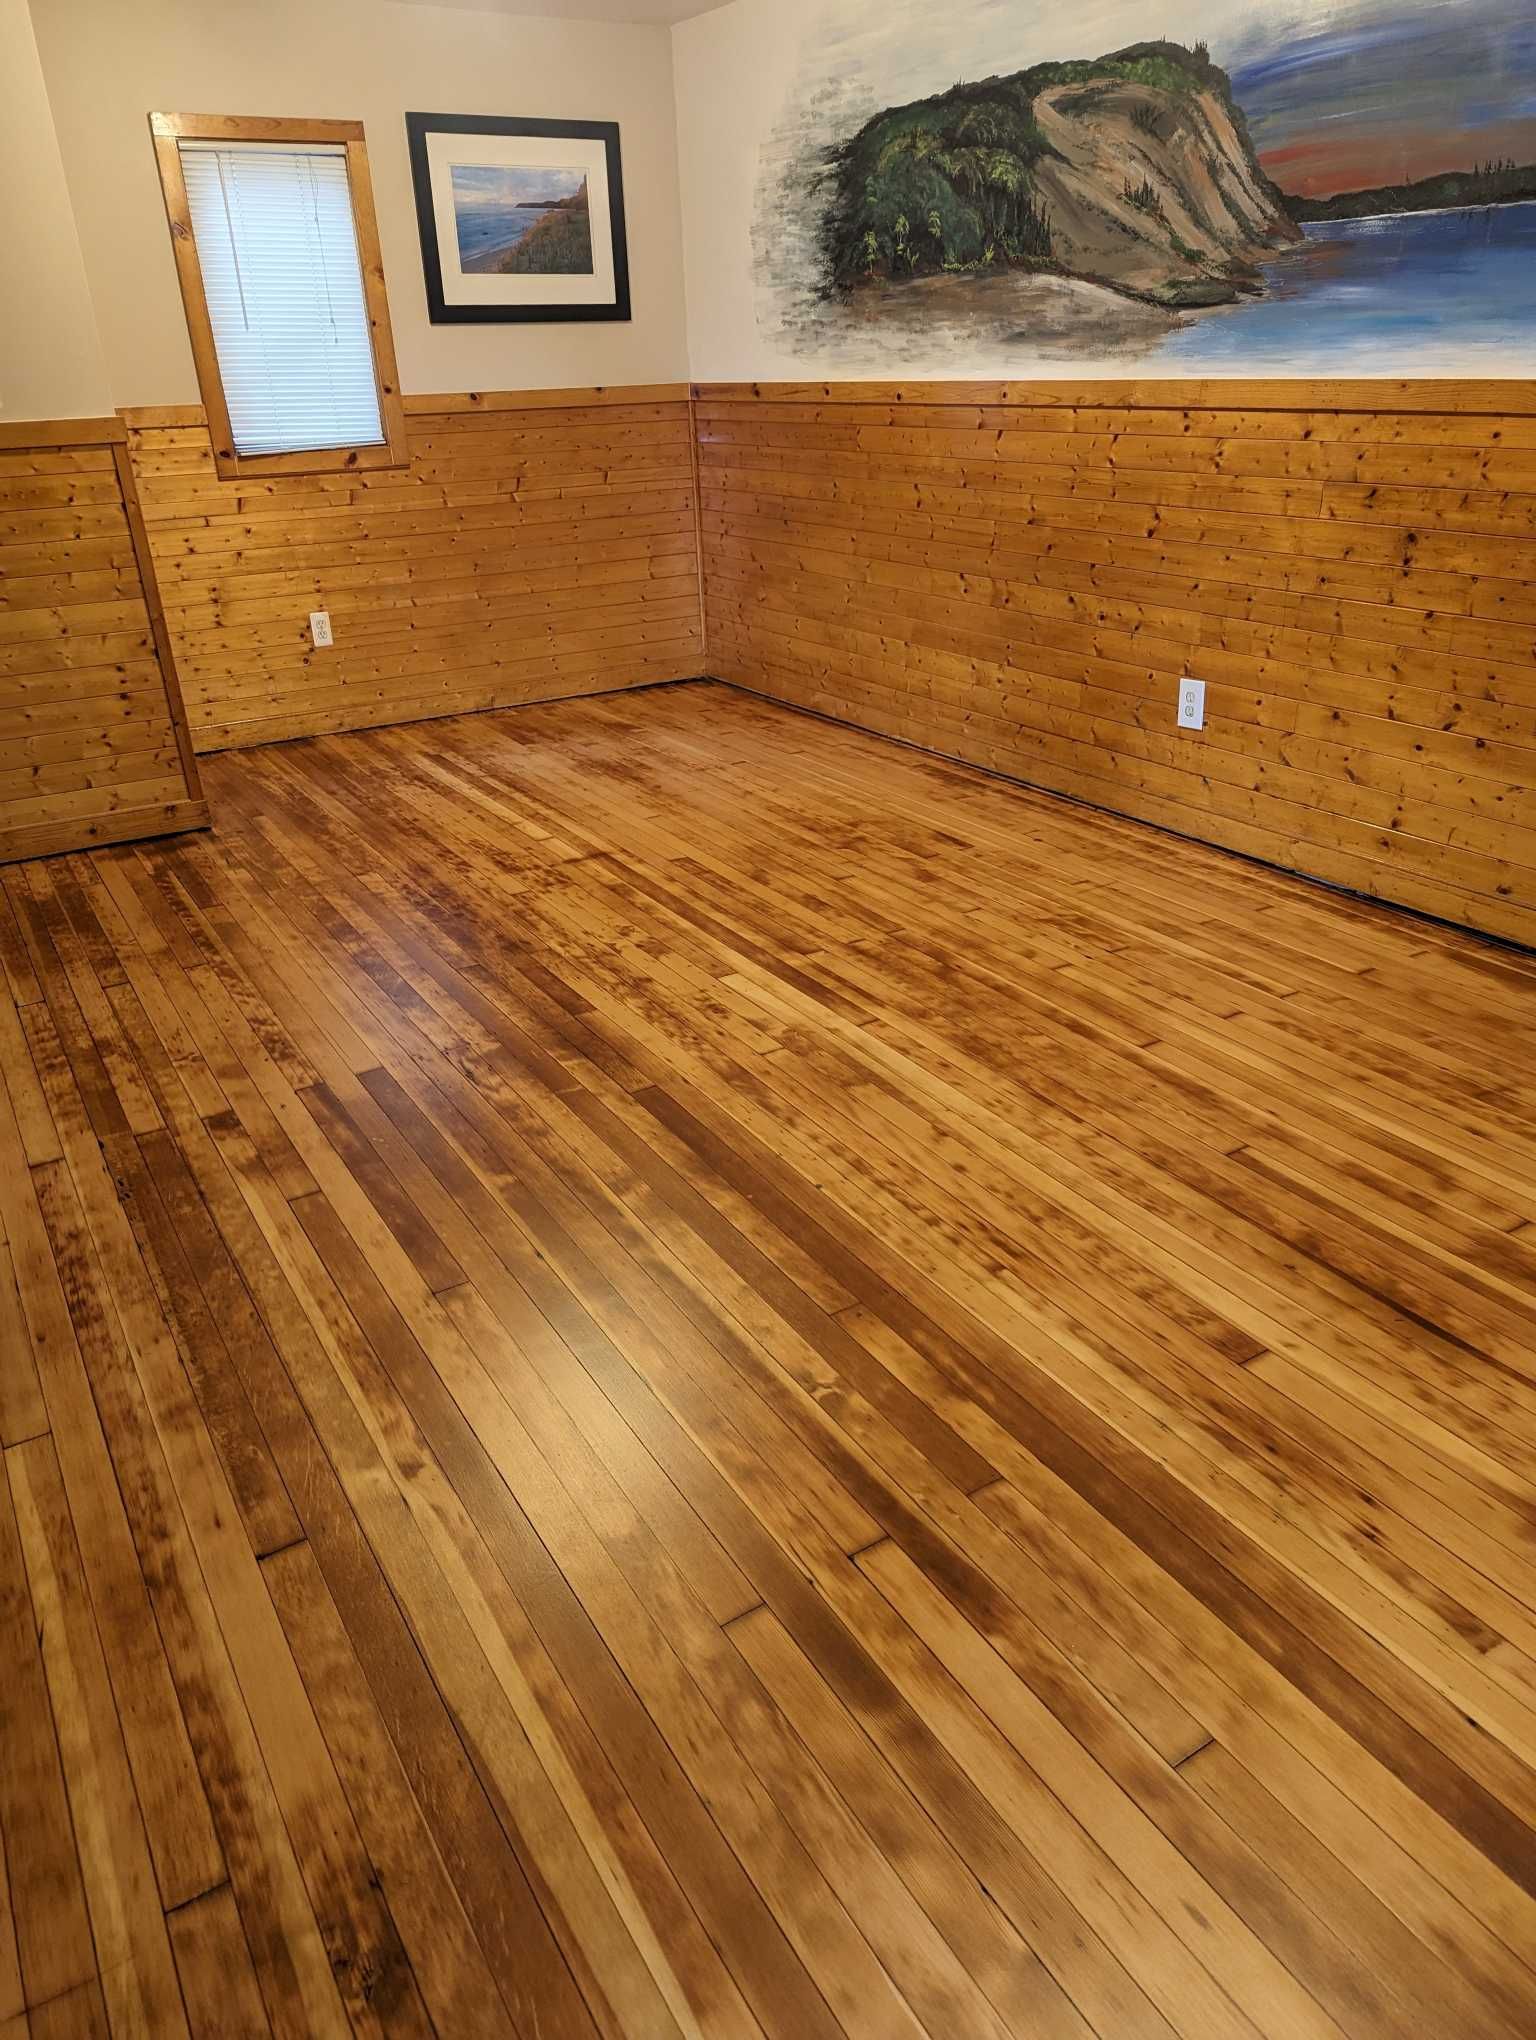 new wood flooring in a room